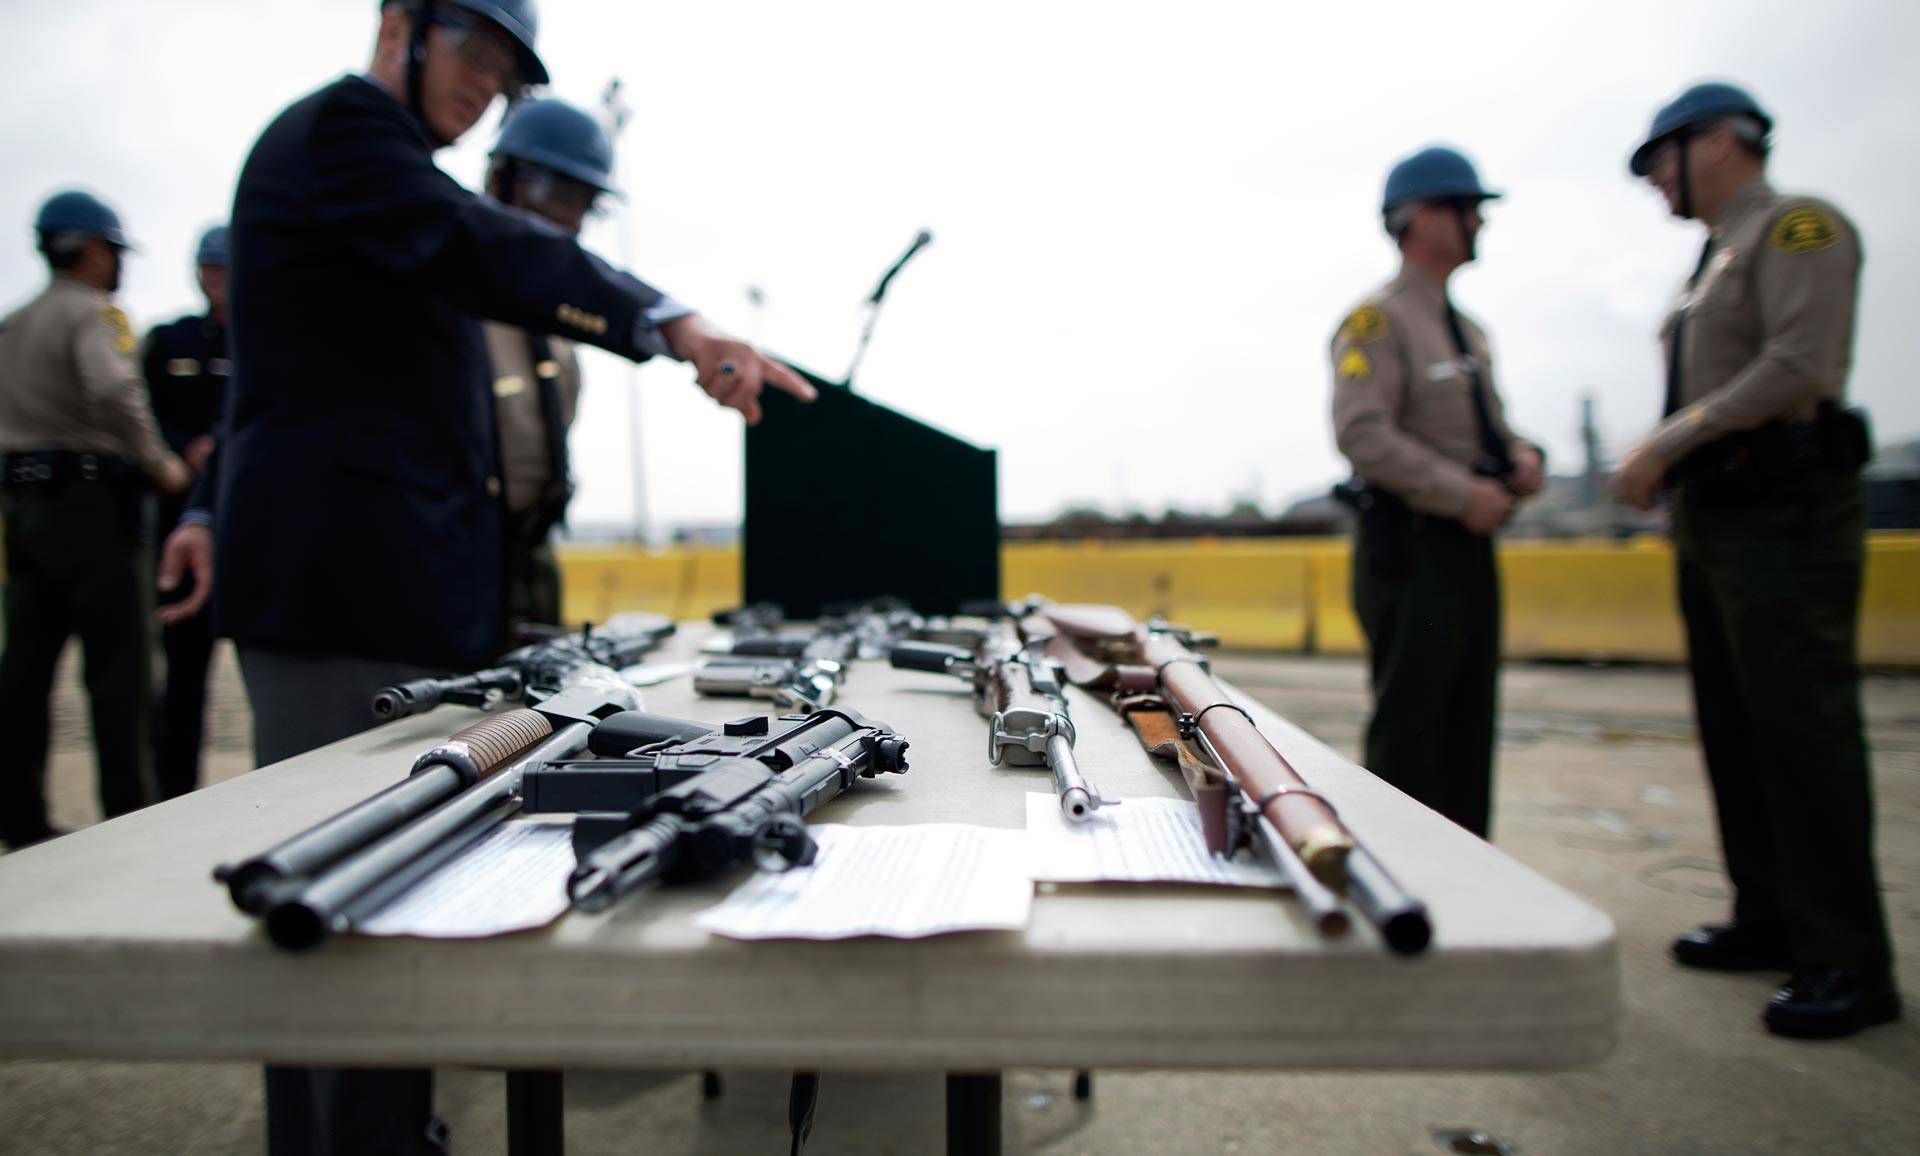 Officials look at guns confiscated in various law enforcement operations at a Los Angeles County Sheriff's Department annual gun melt. David McNew/Getty Images